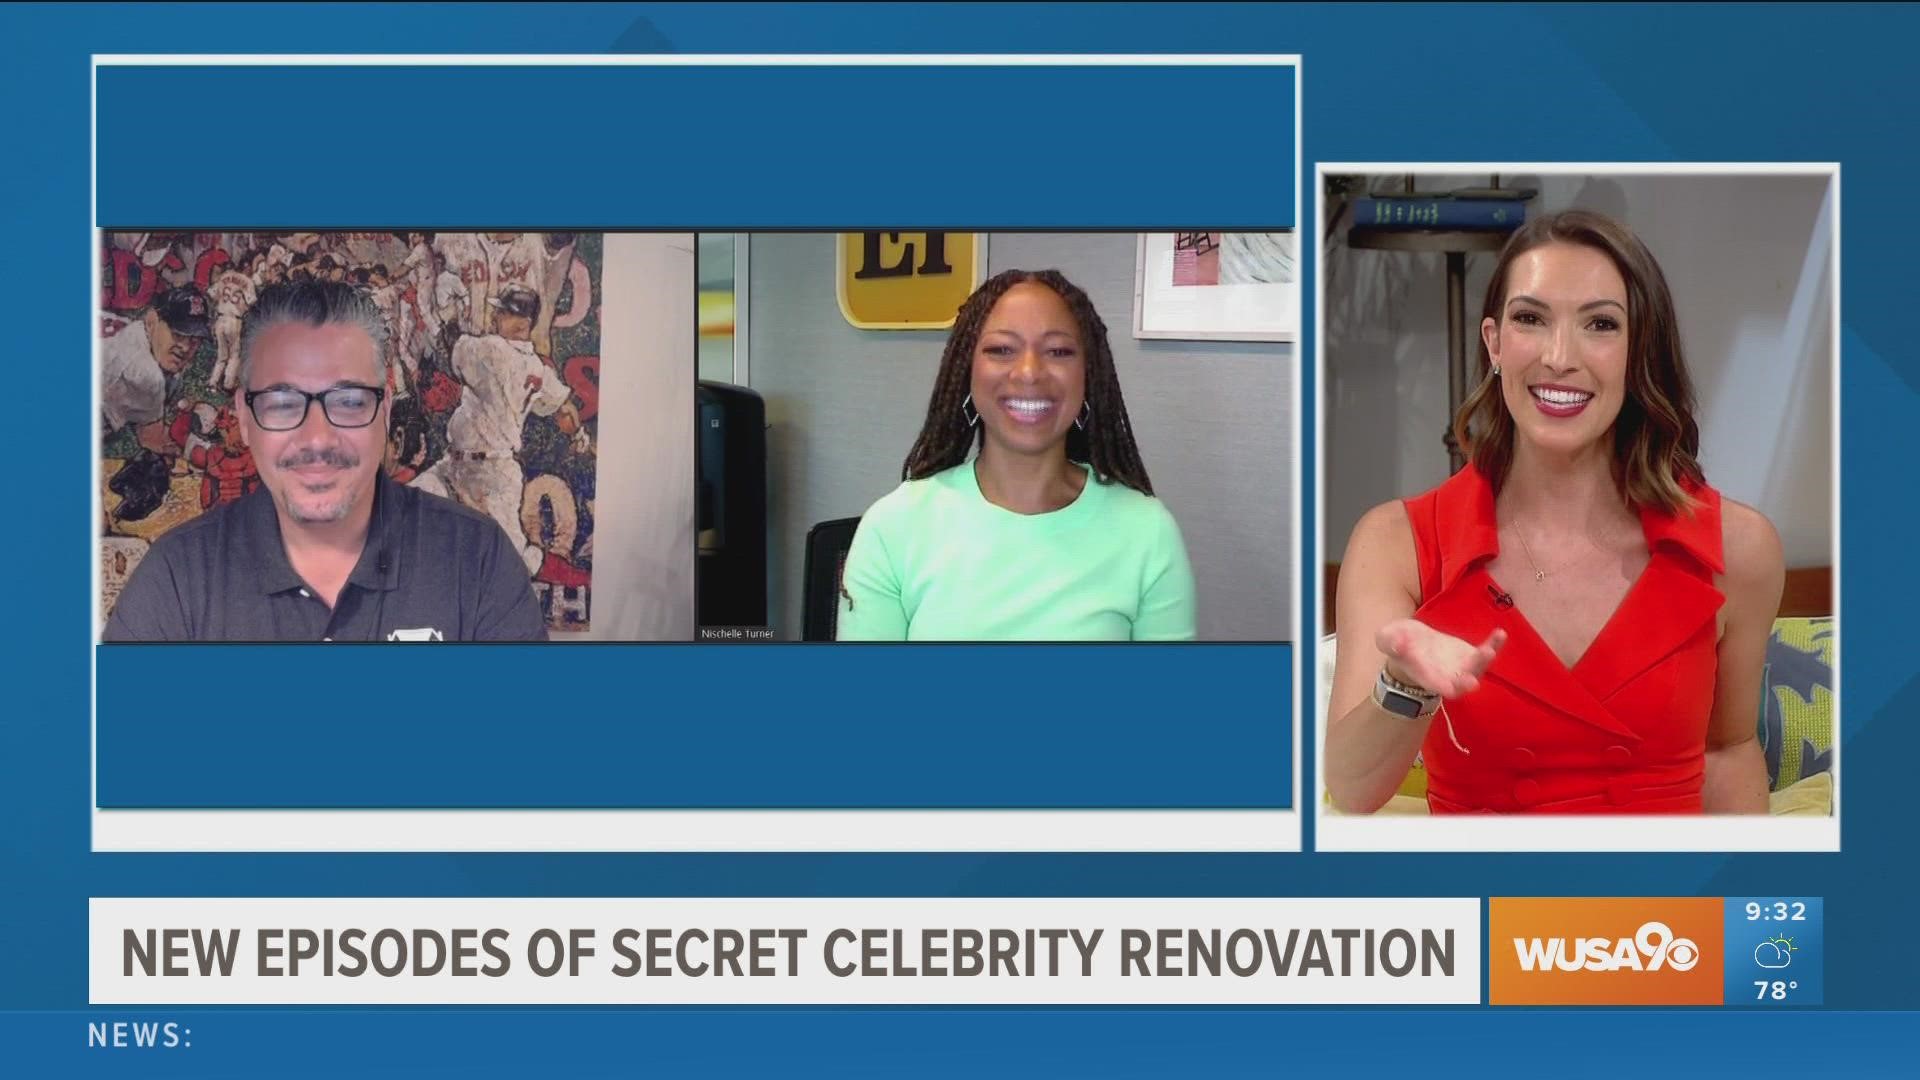 Secret Celebrity Renovation host Nichelle Turner and design team member "Boston Rob" Mariano talk about this new season. Check out the show on WUSA9 and Paramount+.